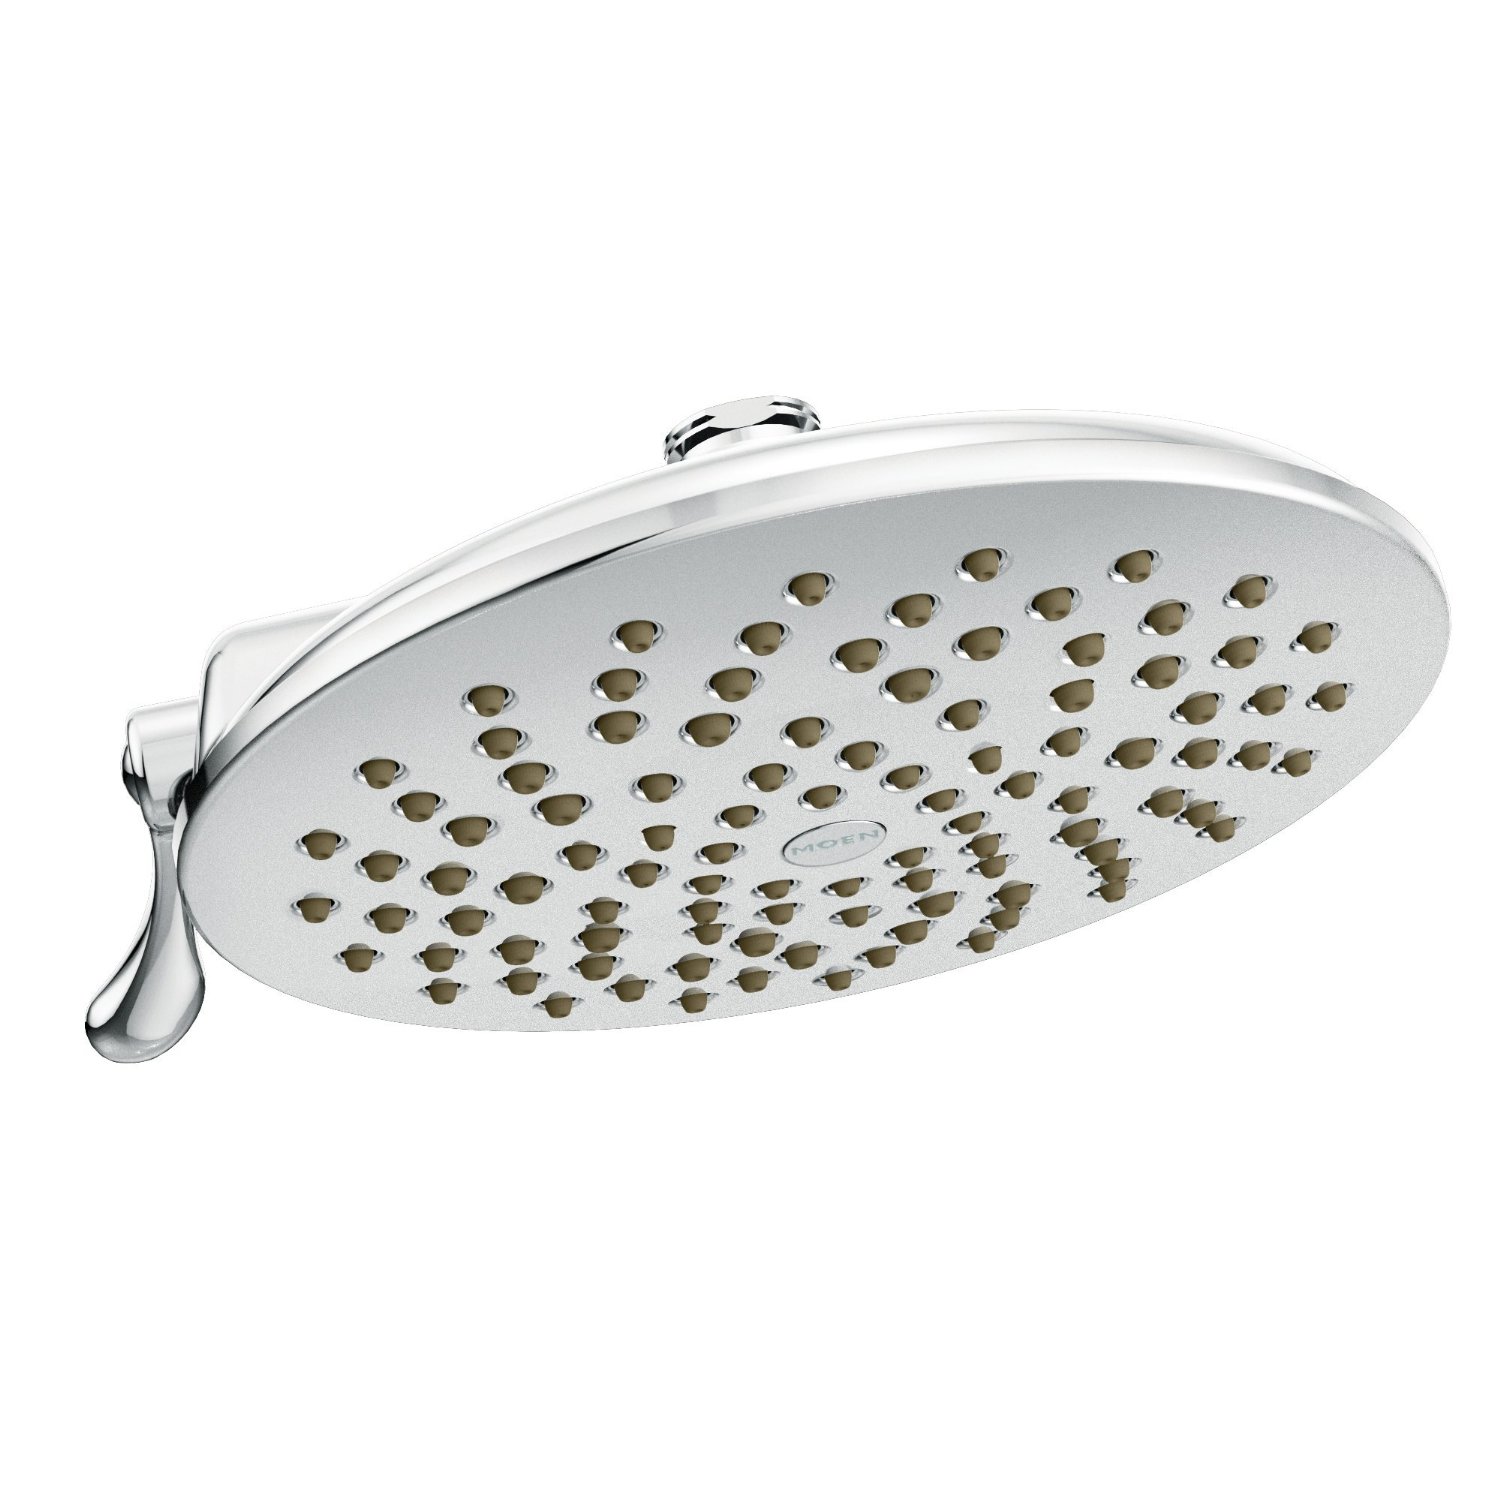 Moen S6320 Velocity 8 Two-Function Rainshower Showerhead with Immersion Technology at 2.5 GPM Flow Rate